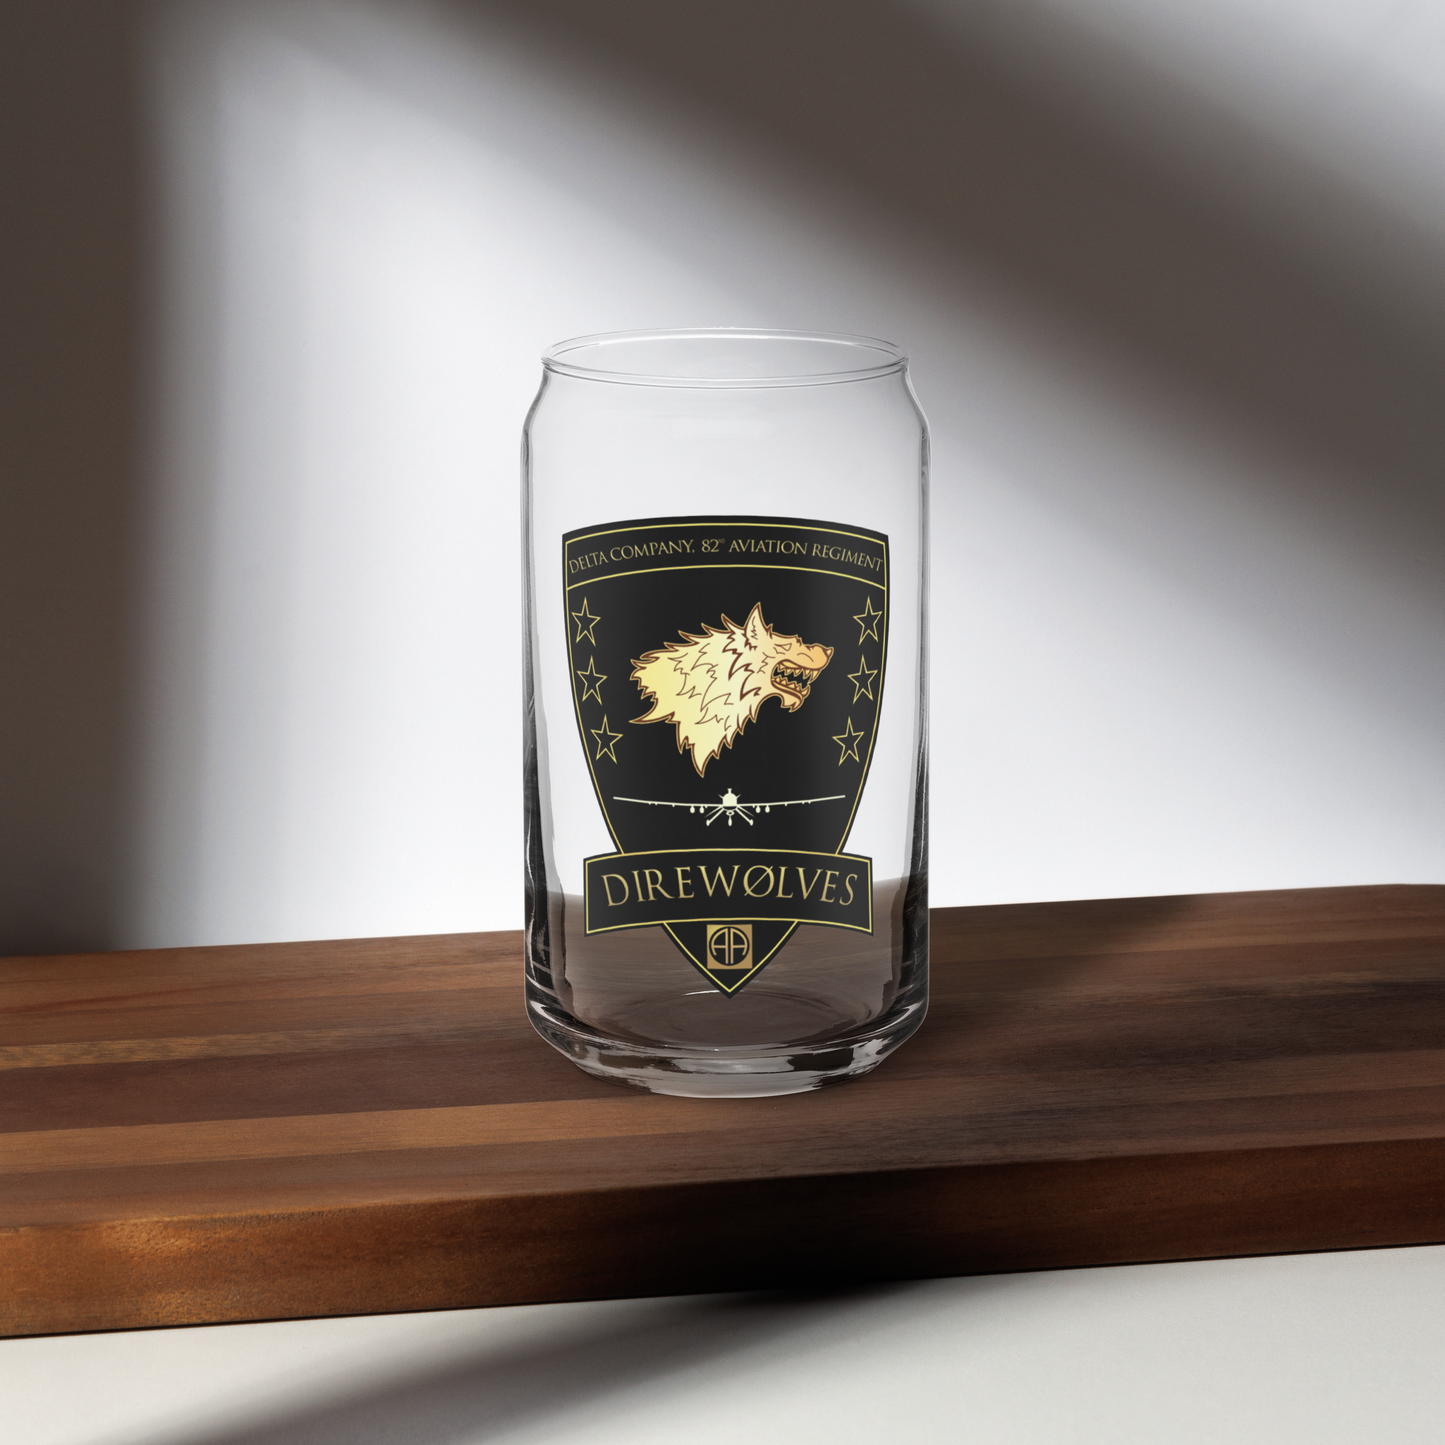 Delta Company, 82nd Aviation Regiment Direwolves Can Shaped Glass